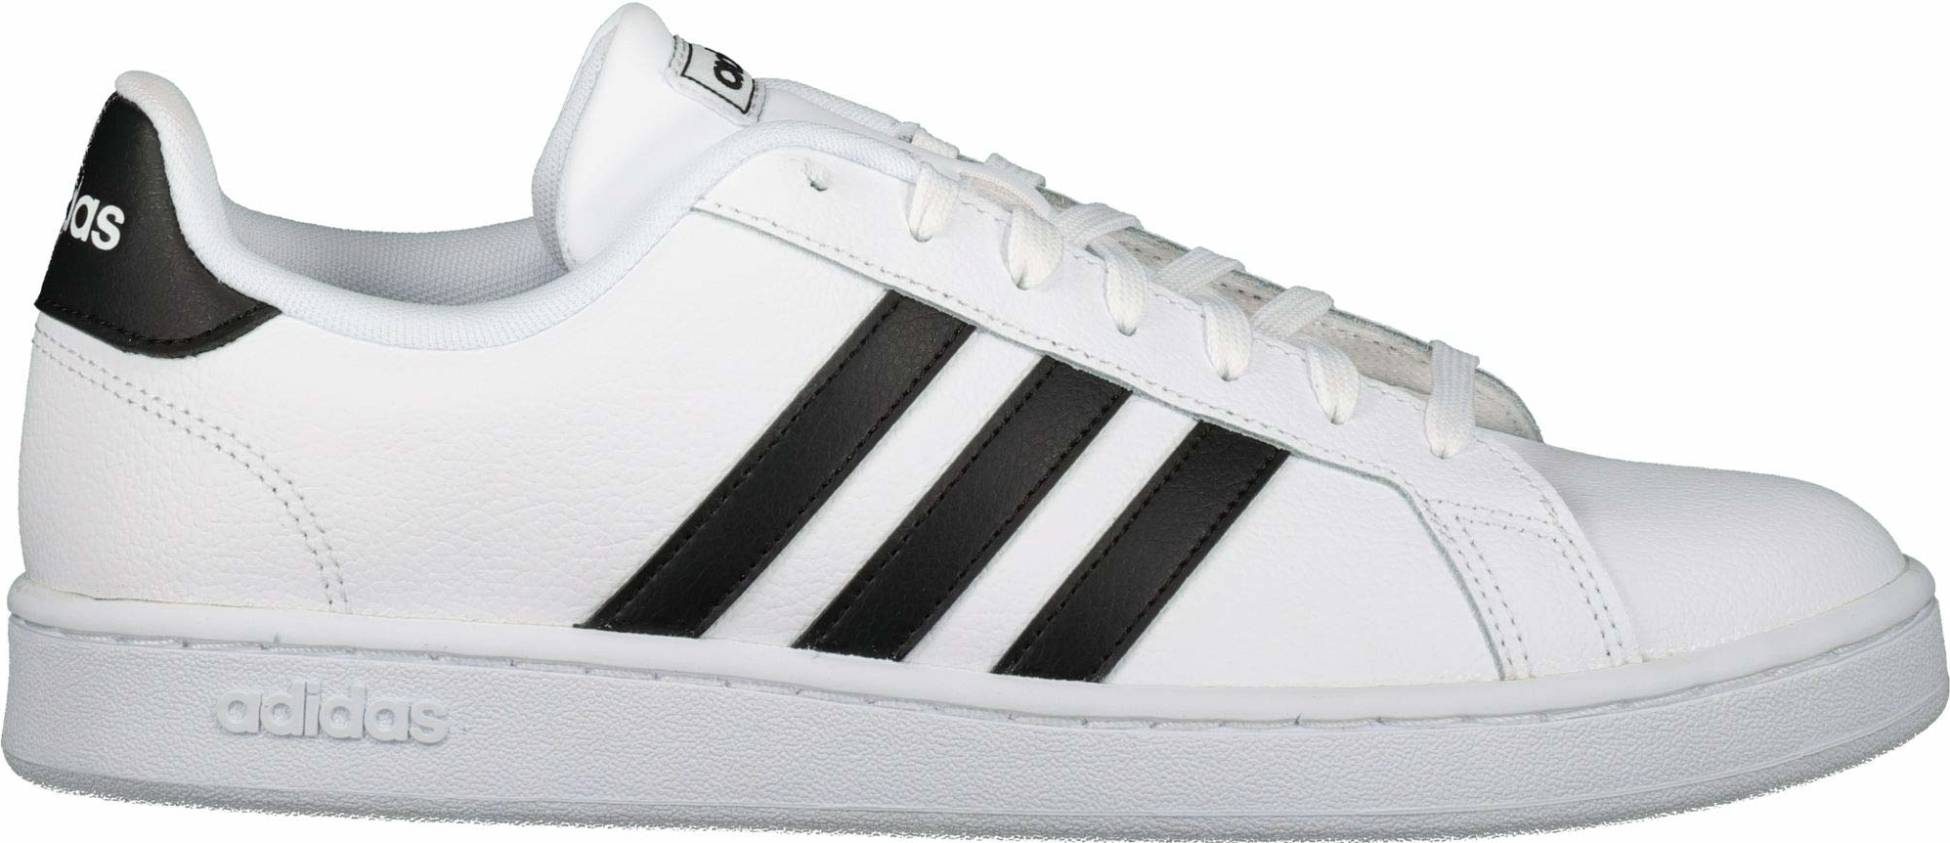 40+ Adidas NEO sneakers: Save up to 51% | RunRepeat كات كات